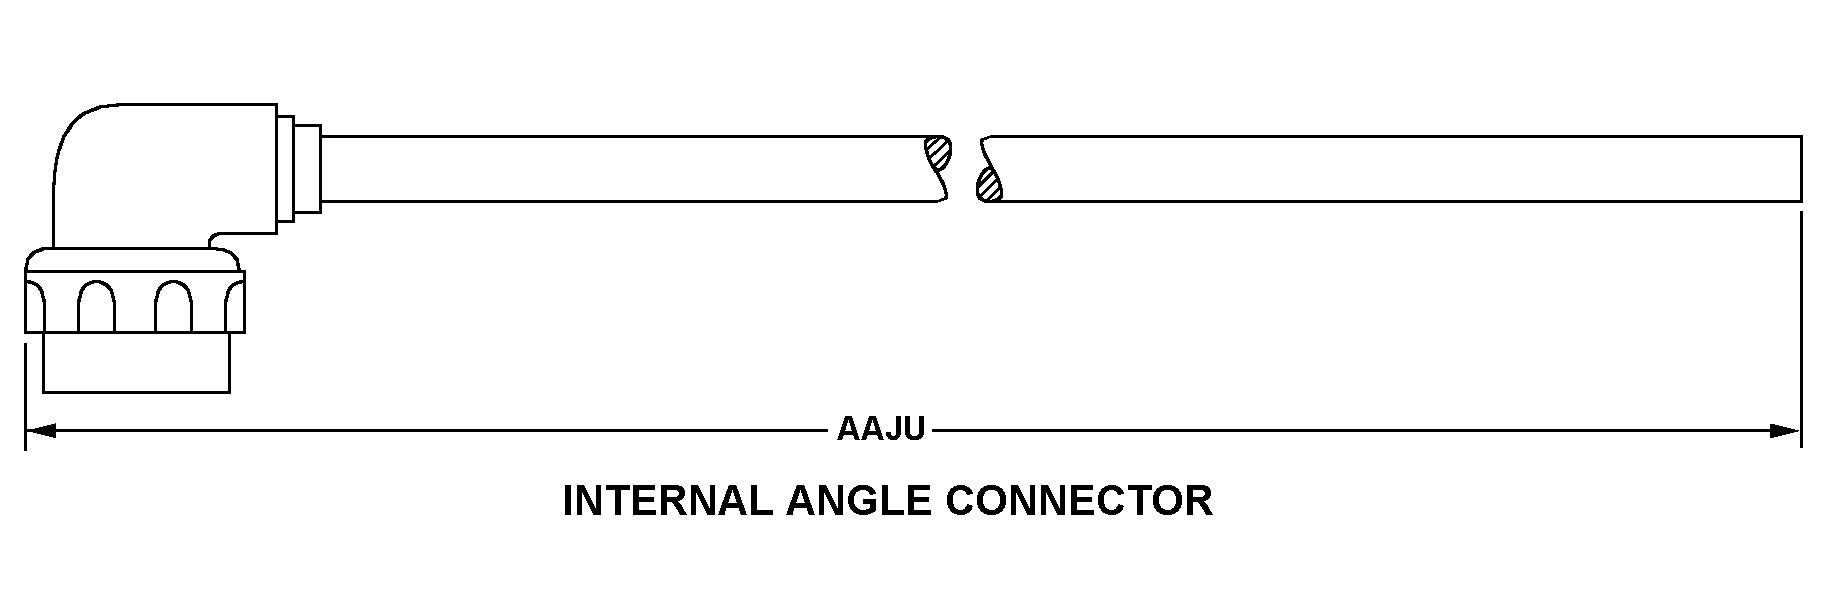 INTERNAL ANGLE CONNECTOR style nsn 6150-01-408-7850